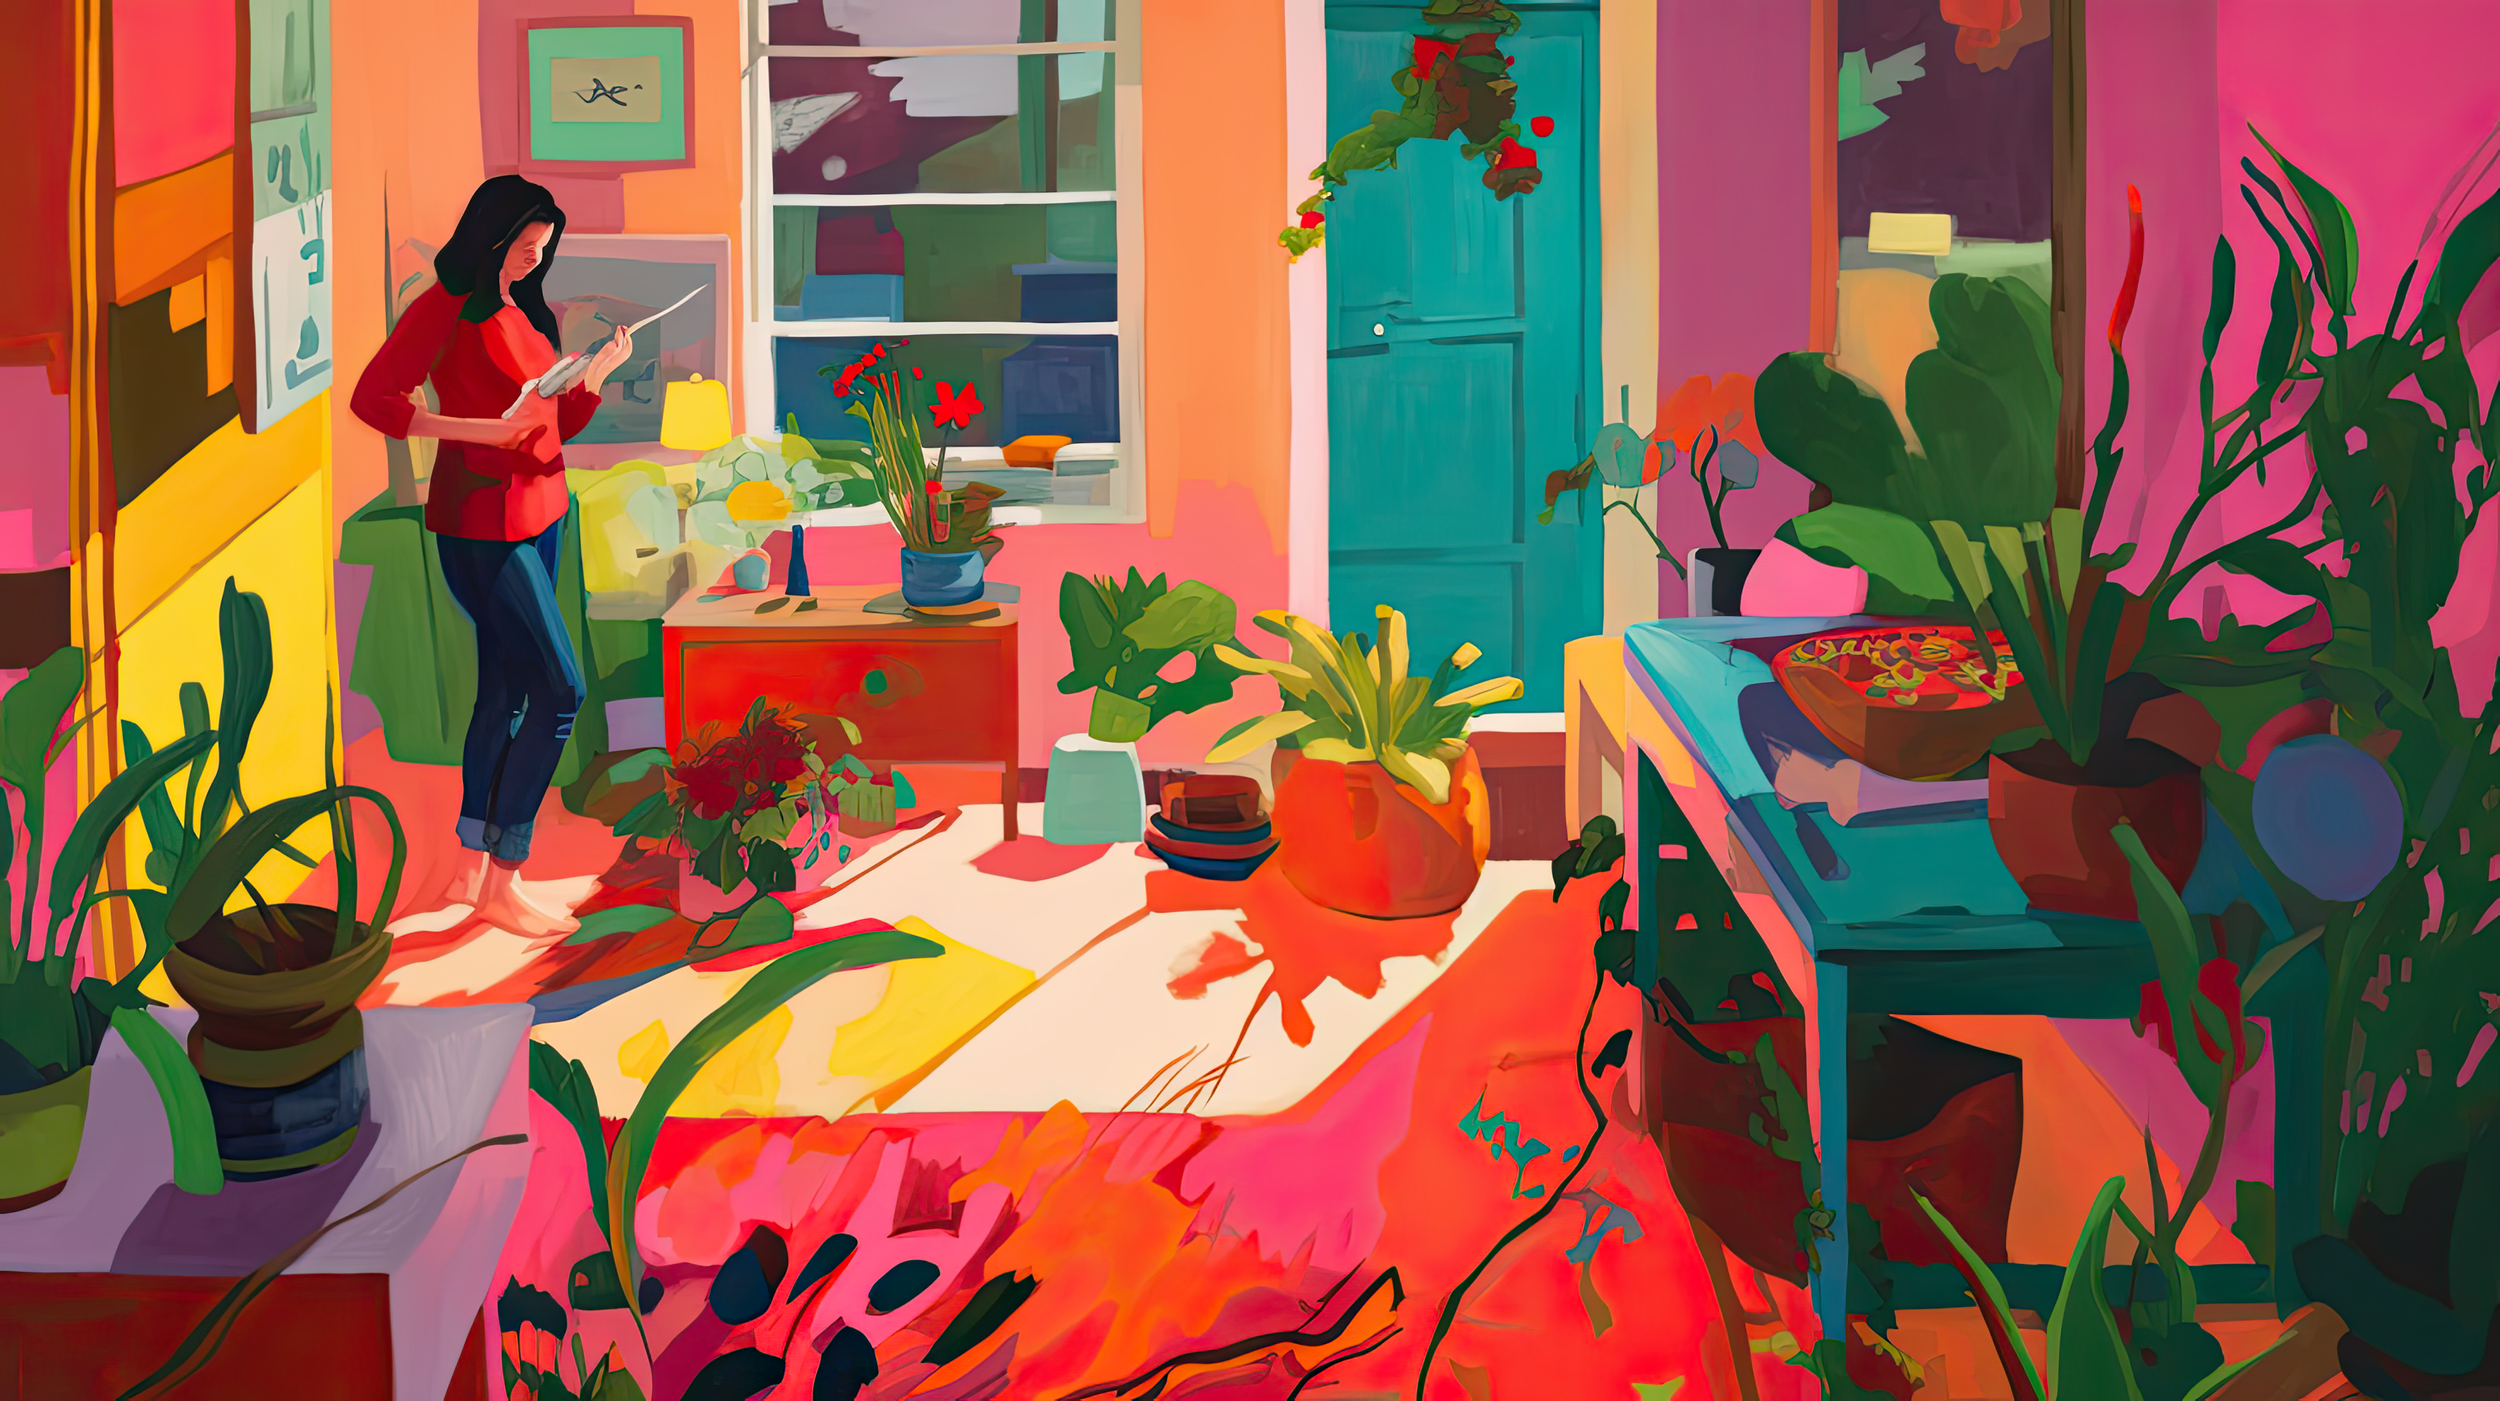 studioriz_A_painting_with_a_bright_and_vibrant_colour_palette_a_eb88986a-a365-4b0b-9876-c4d1ebb0577b.png